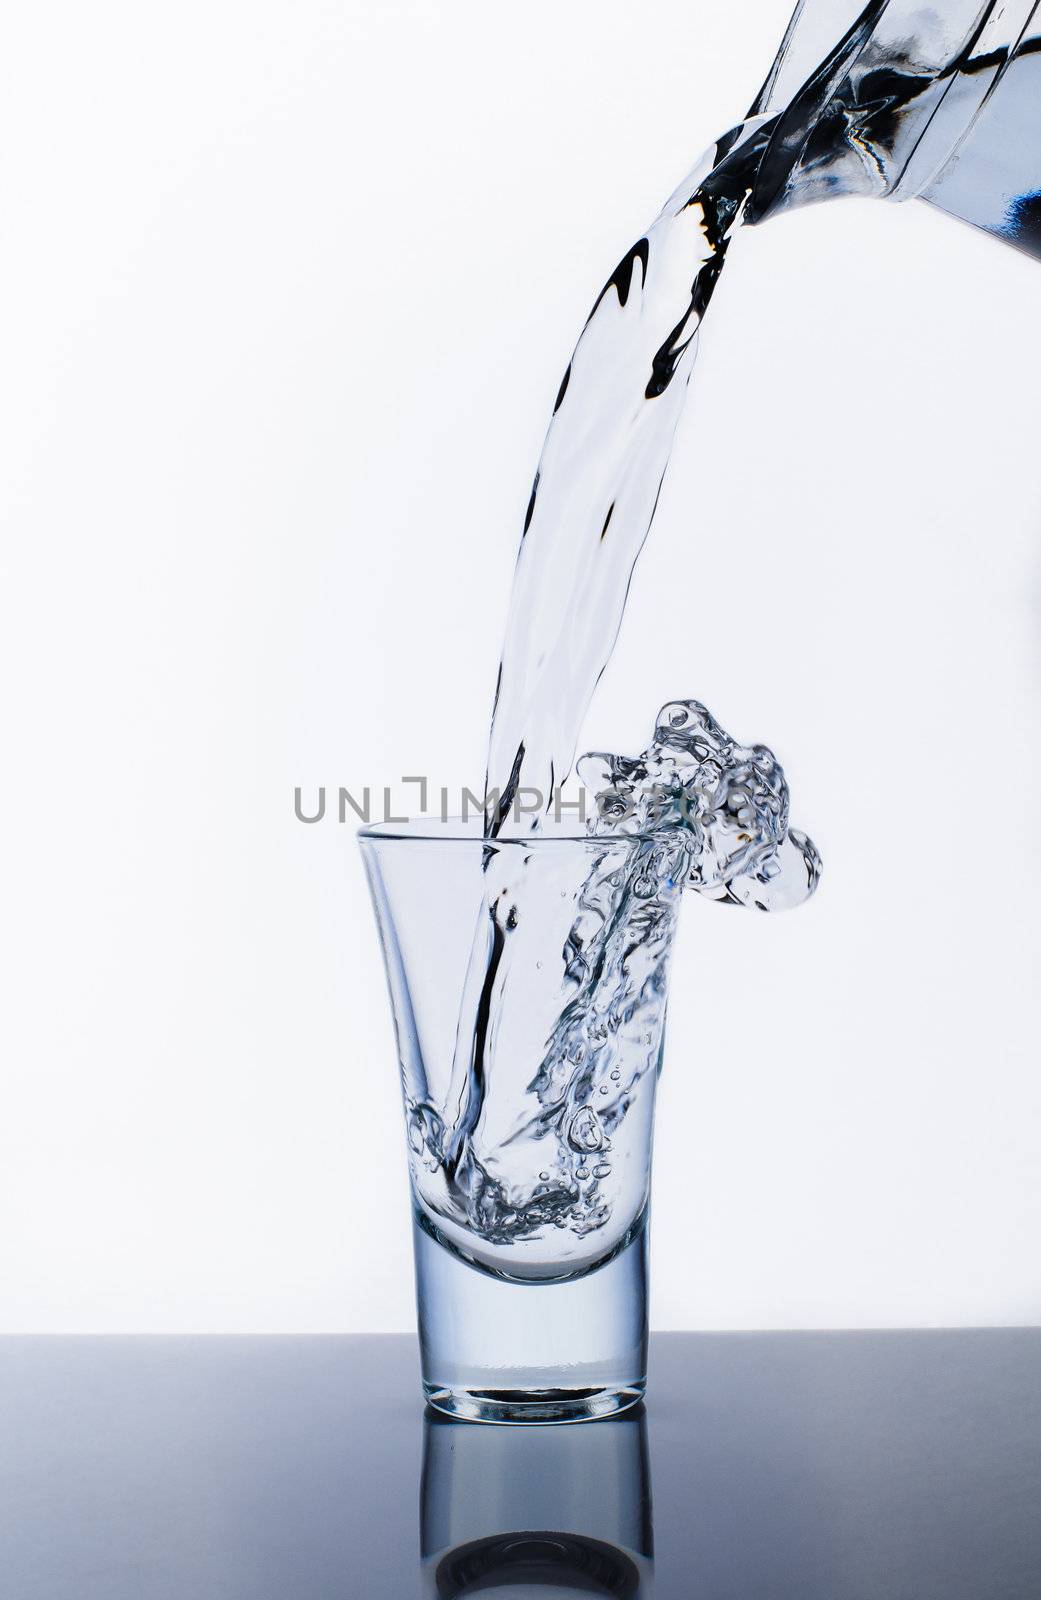 Decanter and glass with water splashes. Isolated on white background